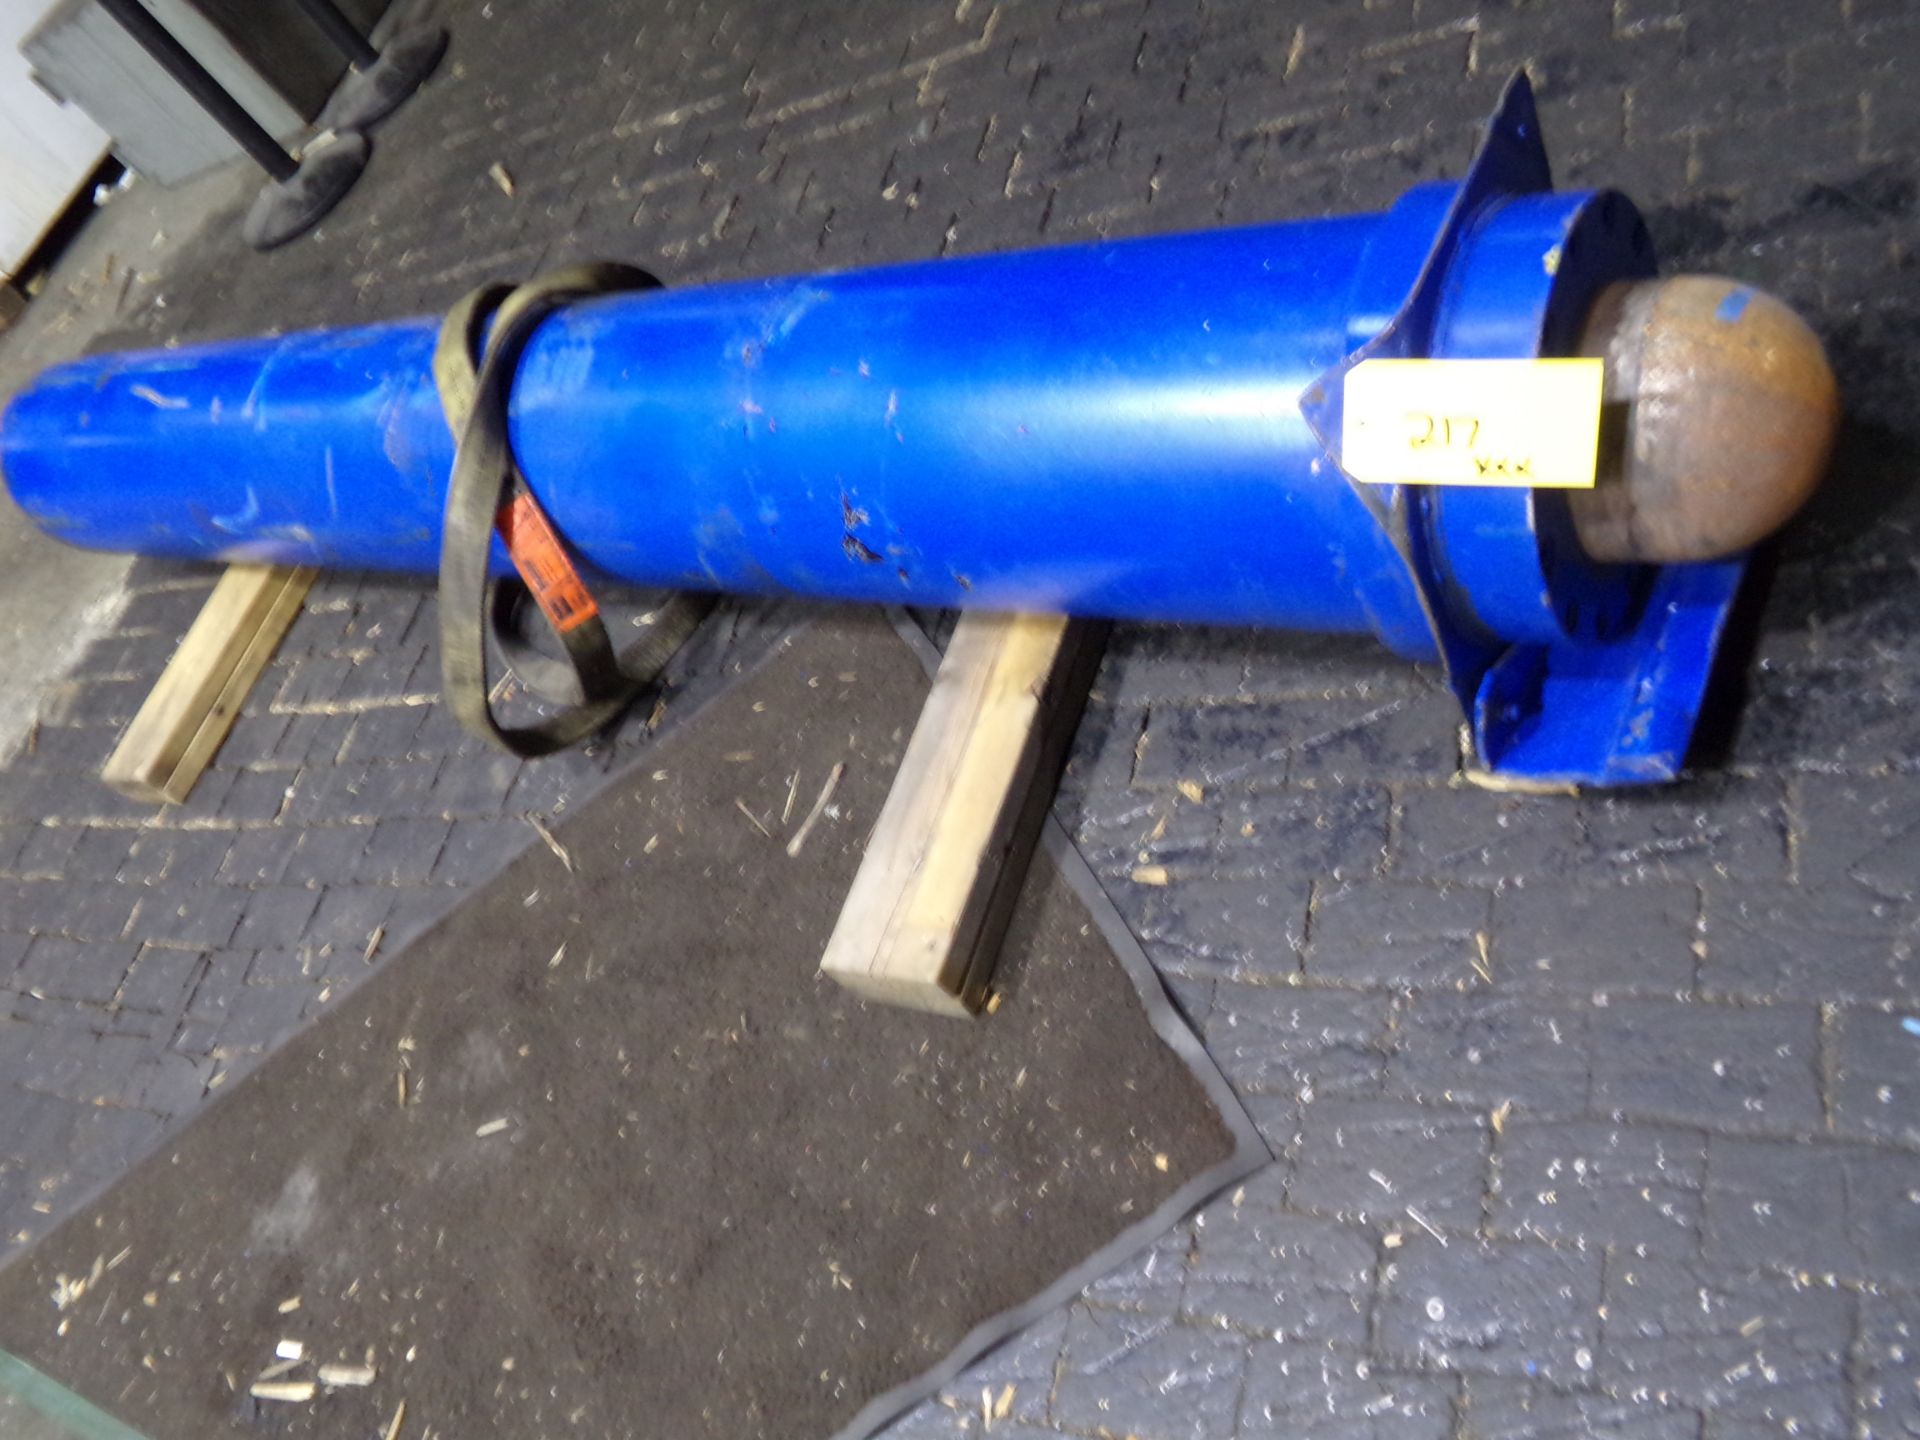 LARGE HYDRAULIC CYLINDER 8.5 FT LENGTH 13" HOUSING 9 INCH PISTON